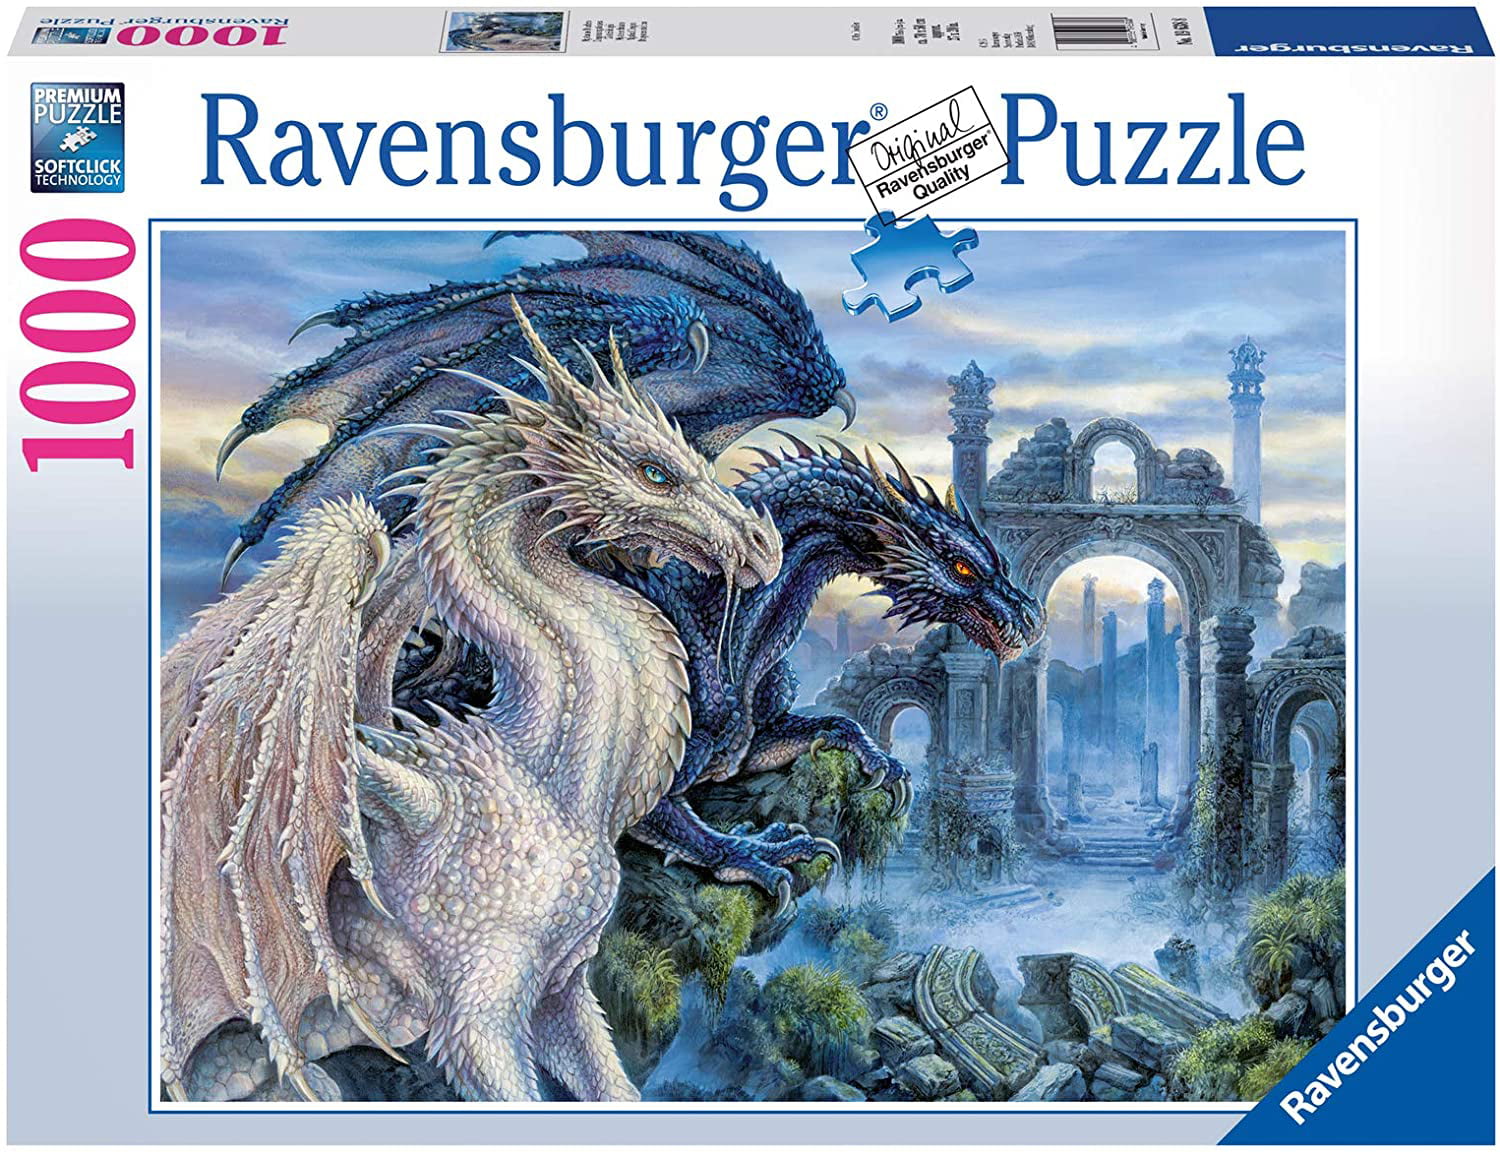 Ravensburger 1000 Piece Jigsaw Puzzle Dragon *New in Shrink Wrap* 